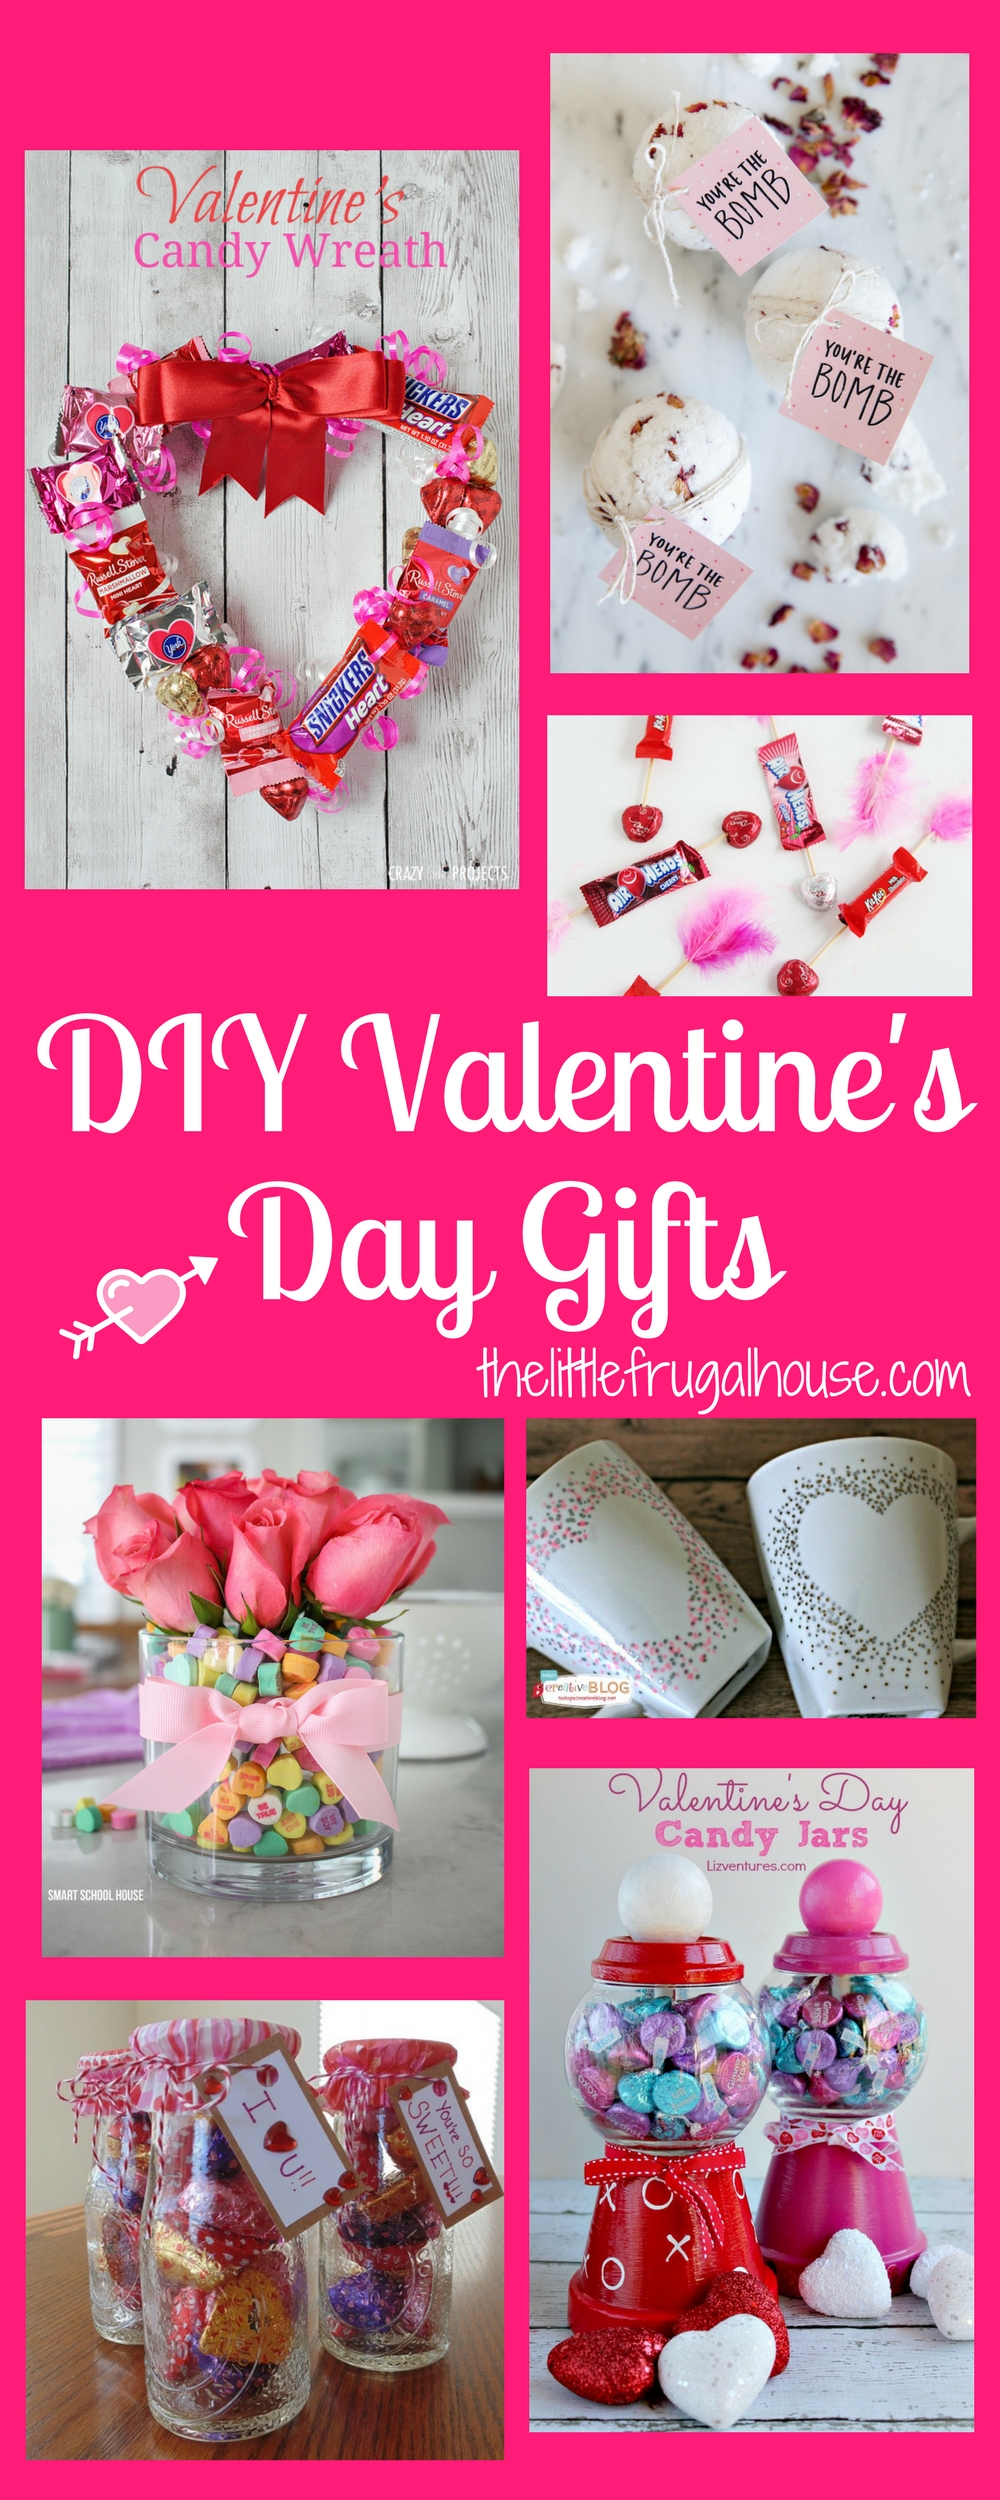 20 Ideas for Homemade Valentines Day Gifts Home, Family, Style and